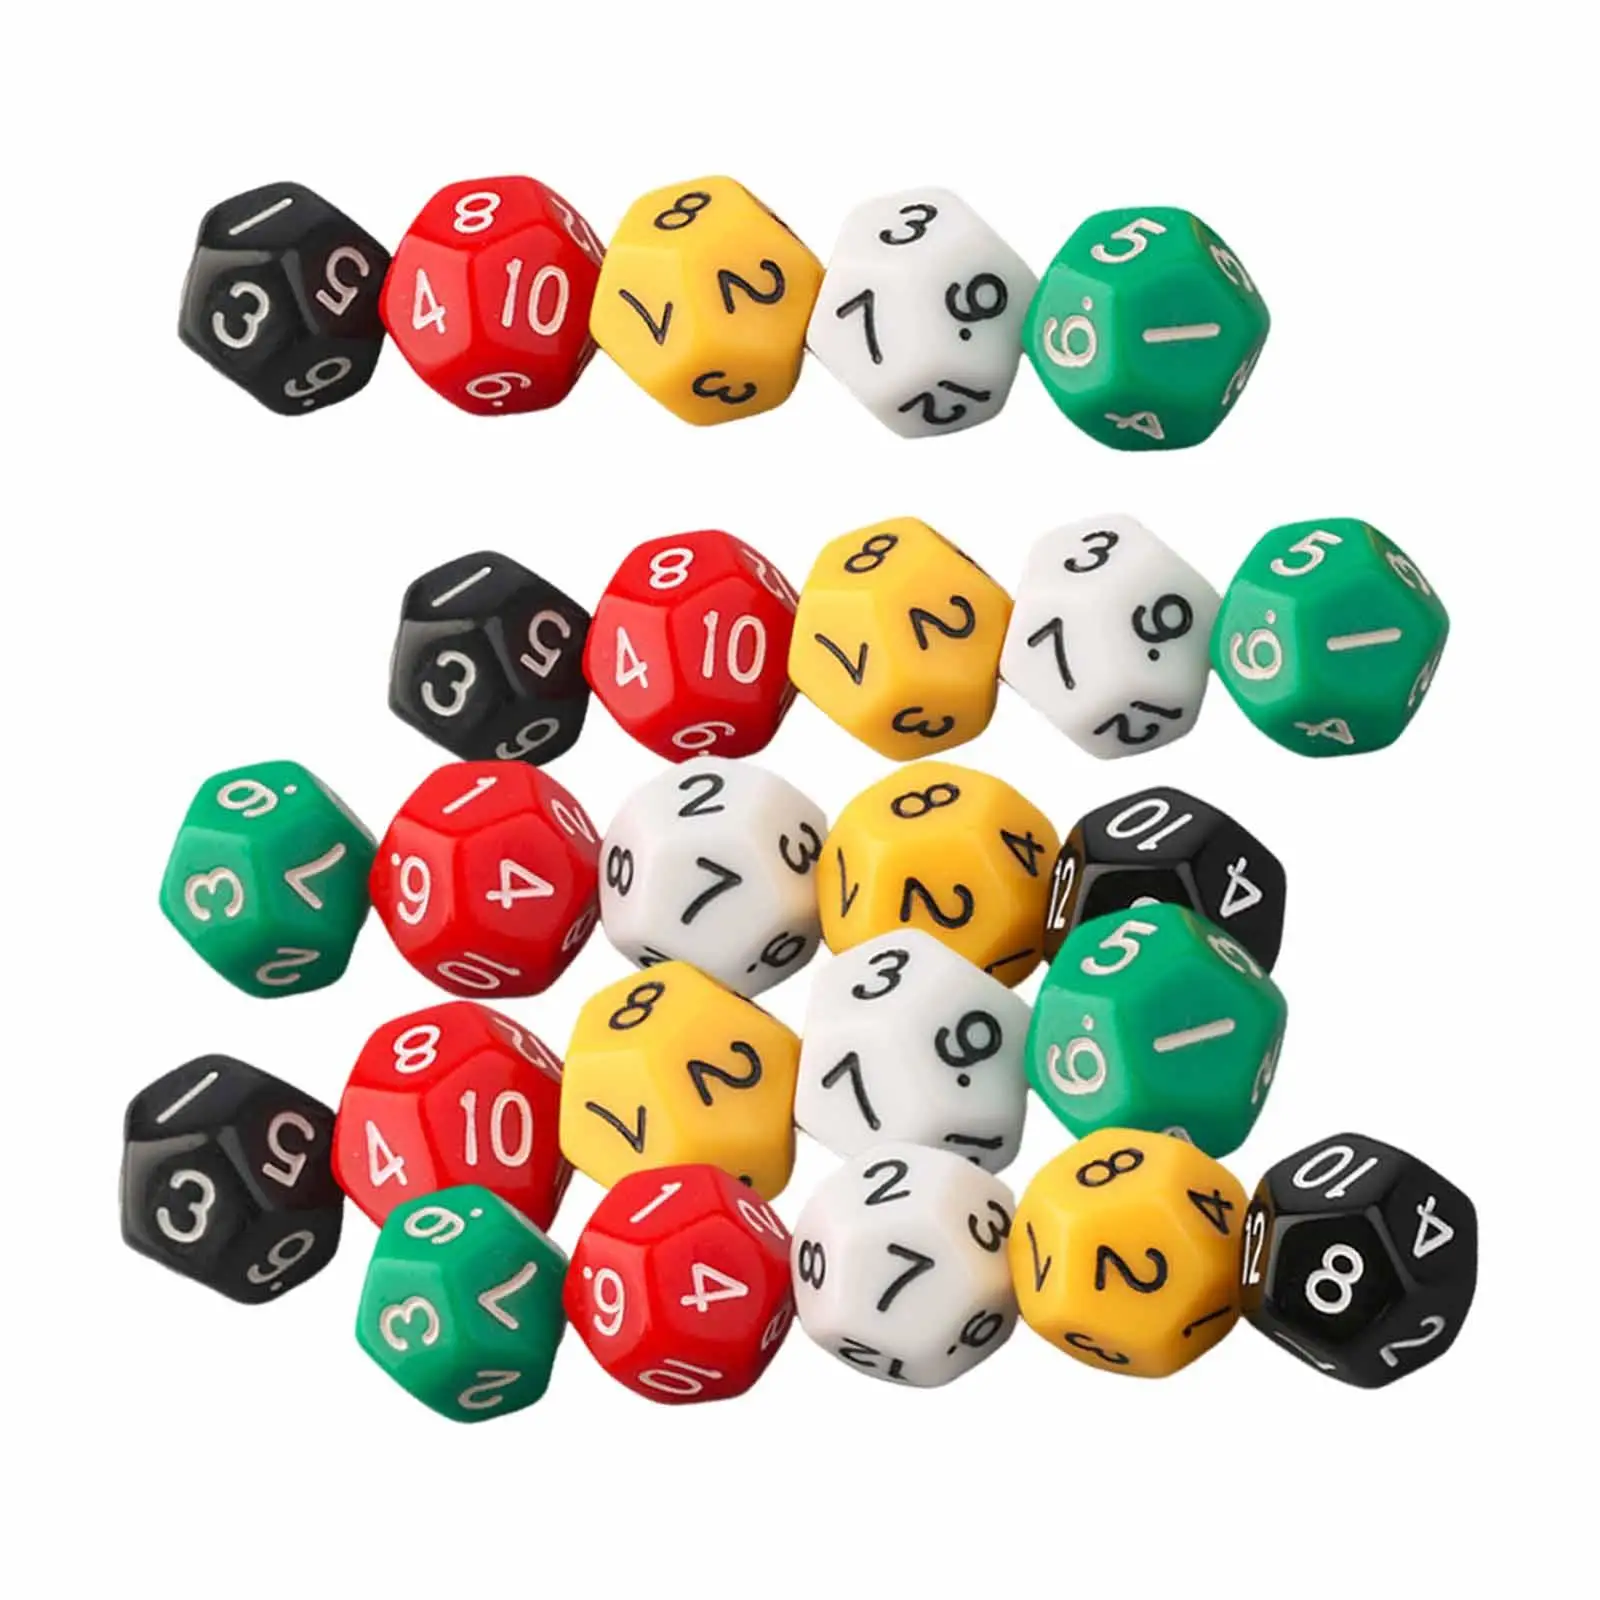 25x Polyhedral Dice Collectibles Acrylic Party Accessories Entertainment Toy Crafts Board Game Multisided Dice for Role Playing